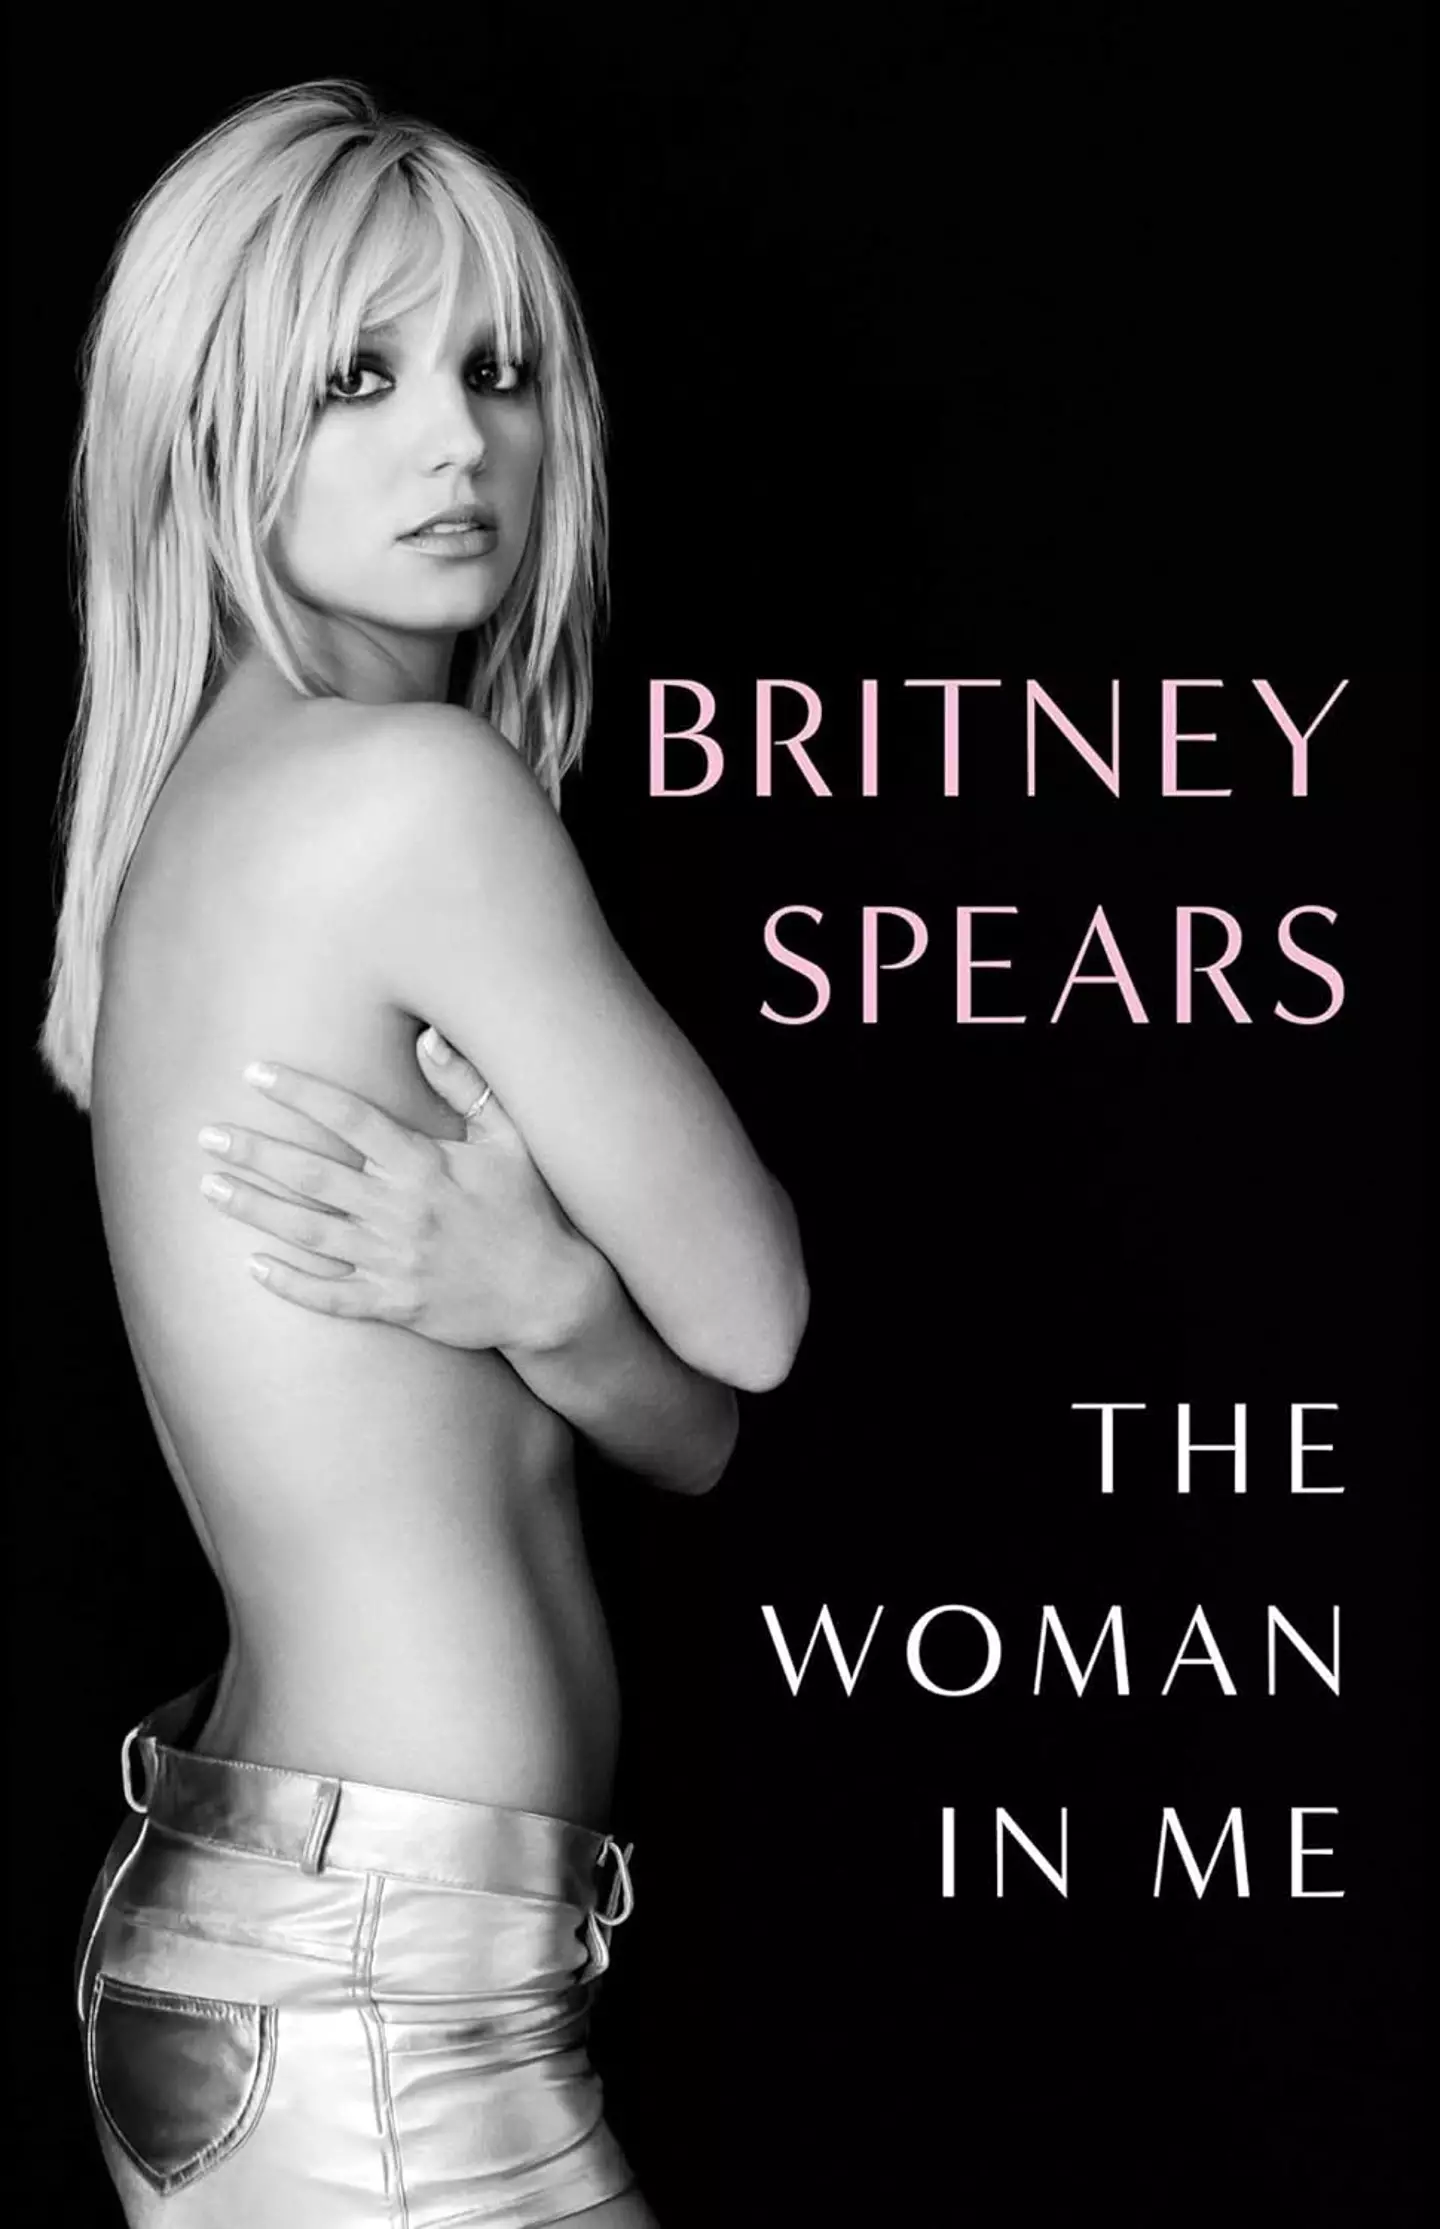 Britney's new book came out yesterday.